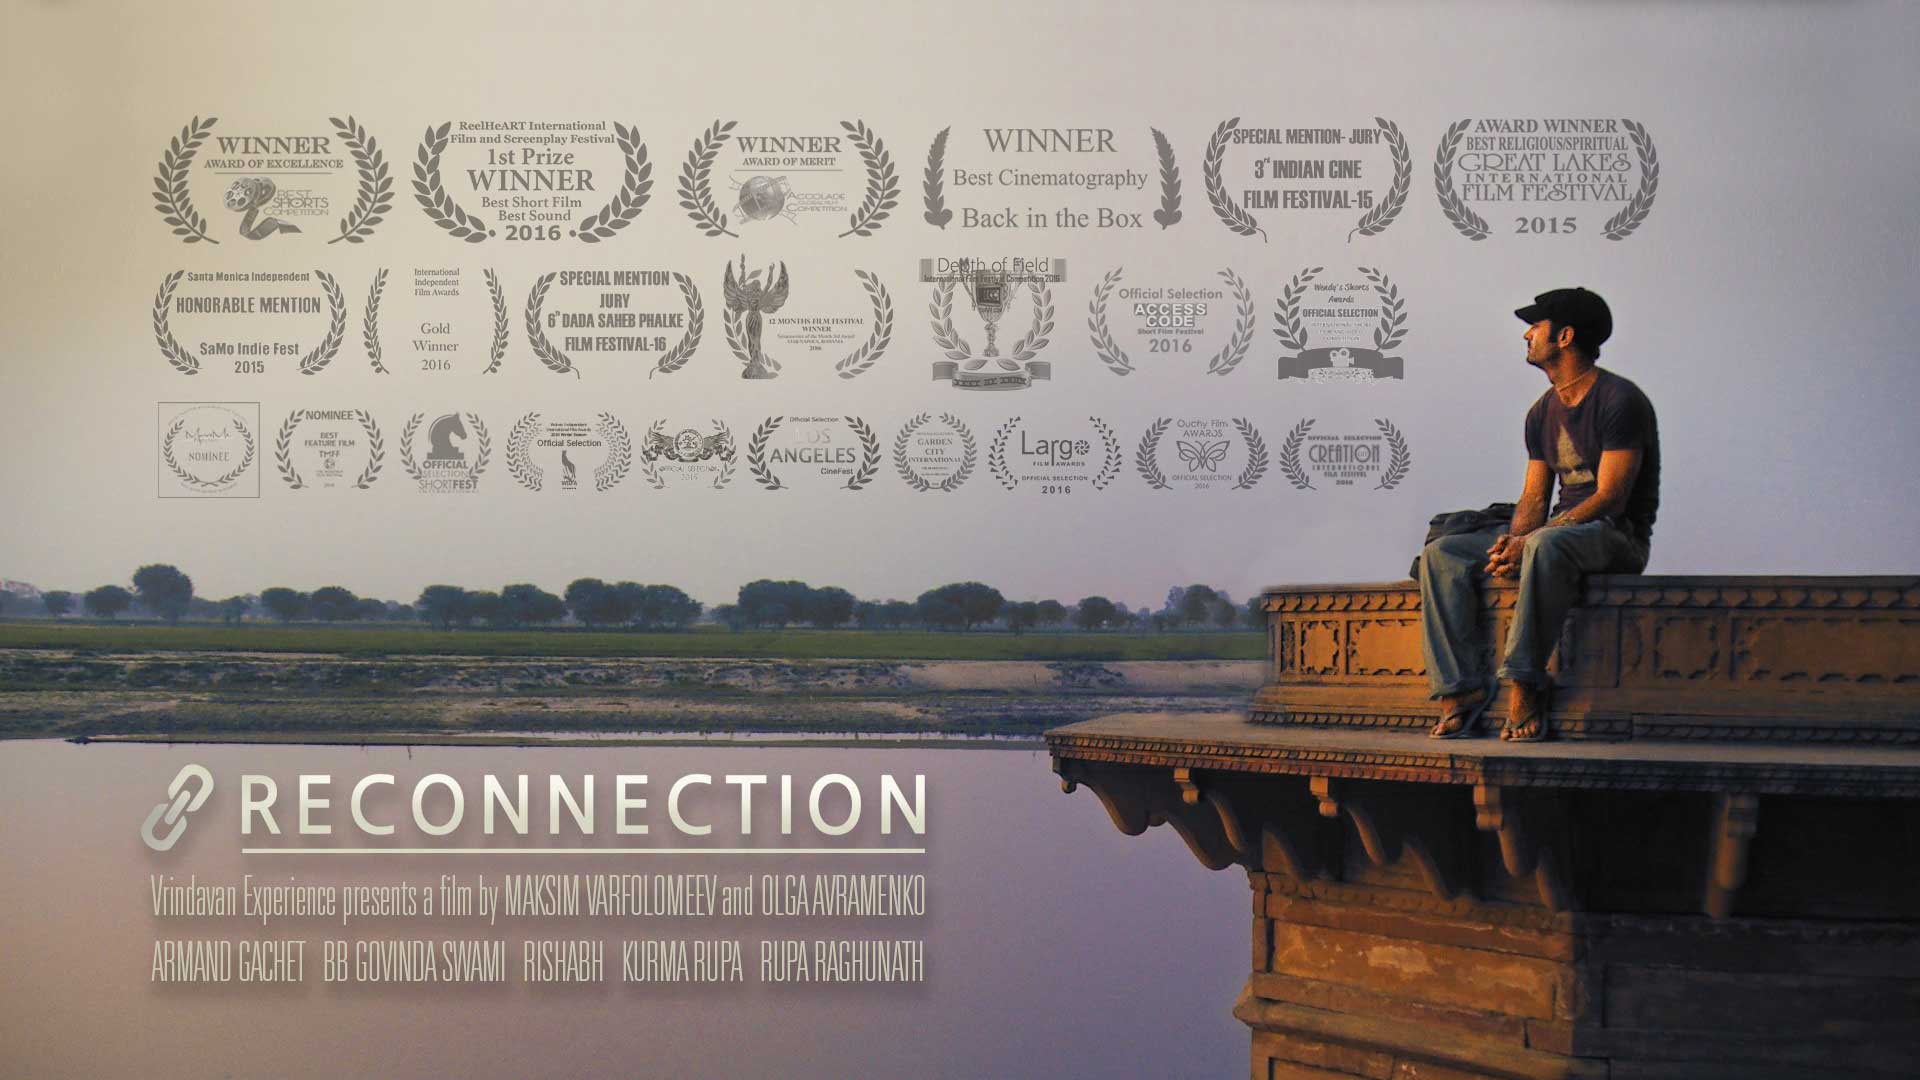 Reconnection - A Multi-Award Winning Film